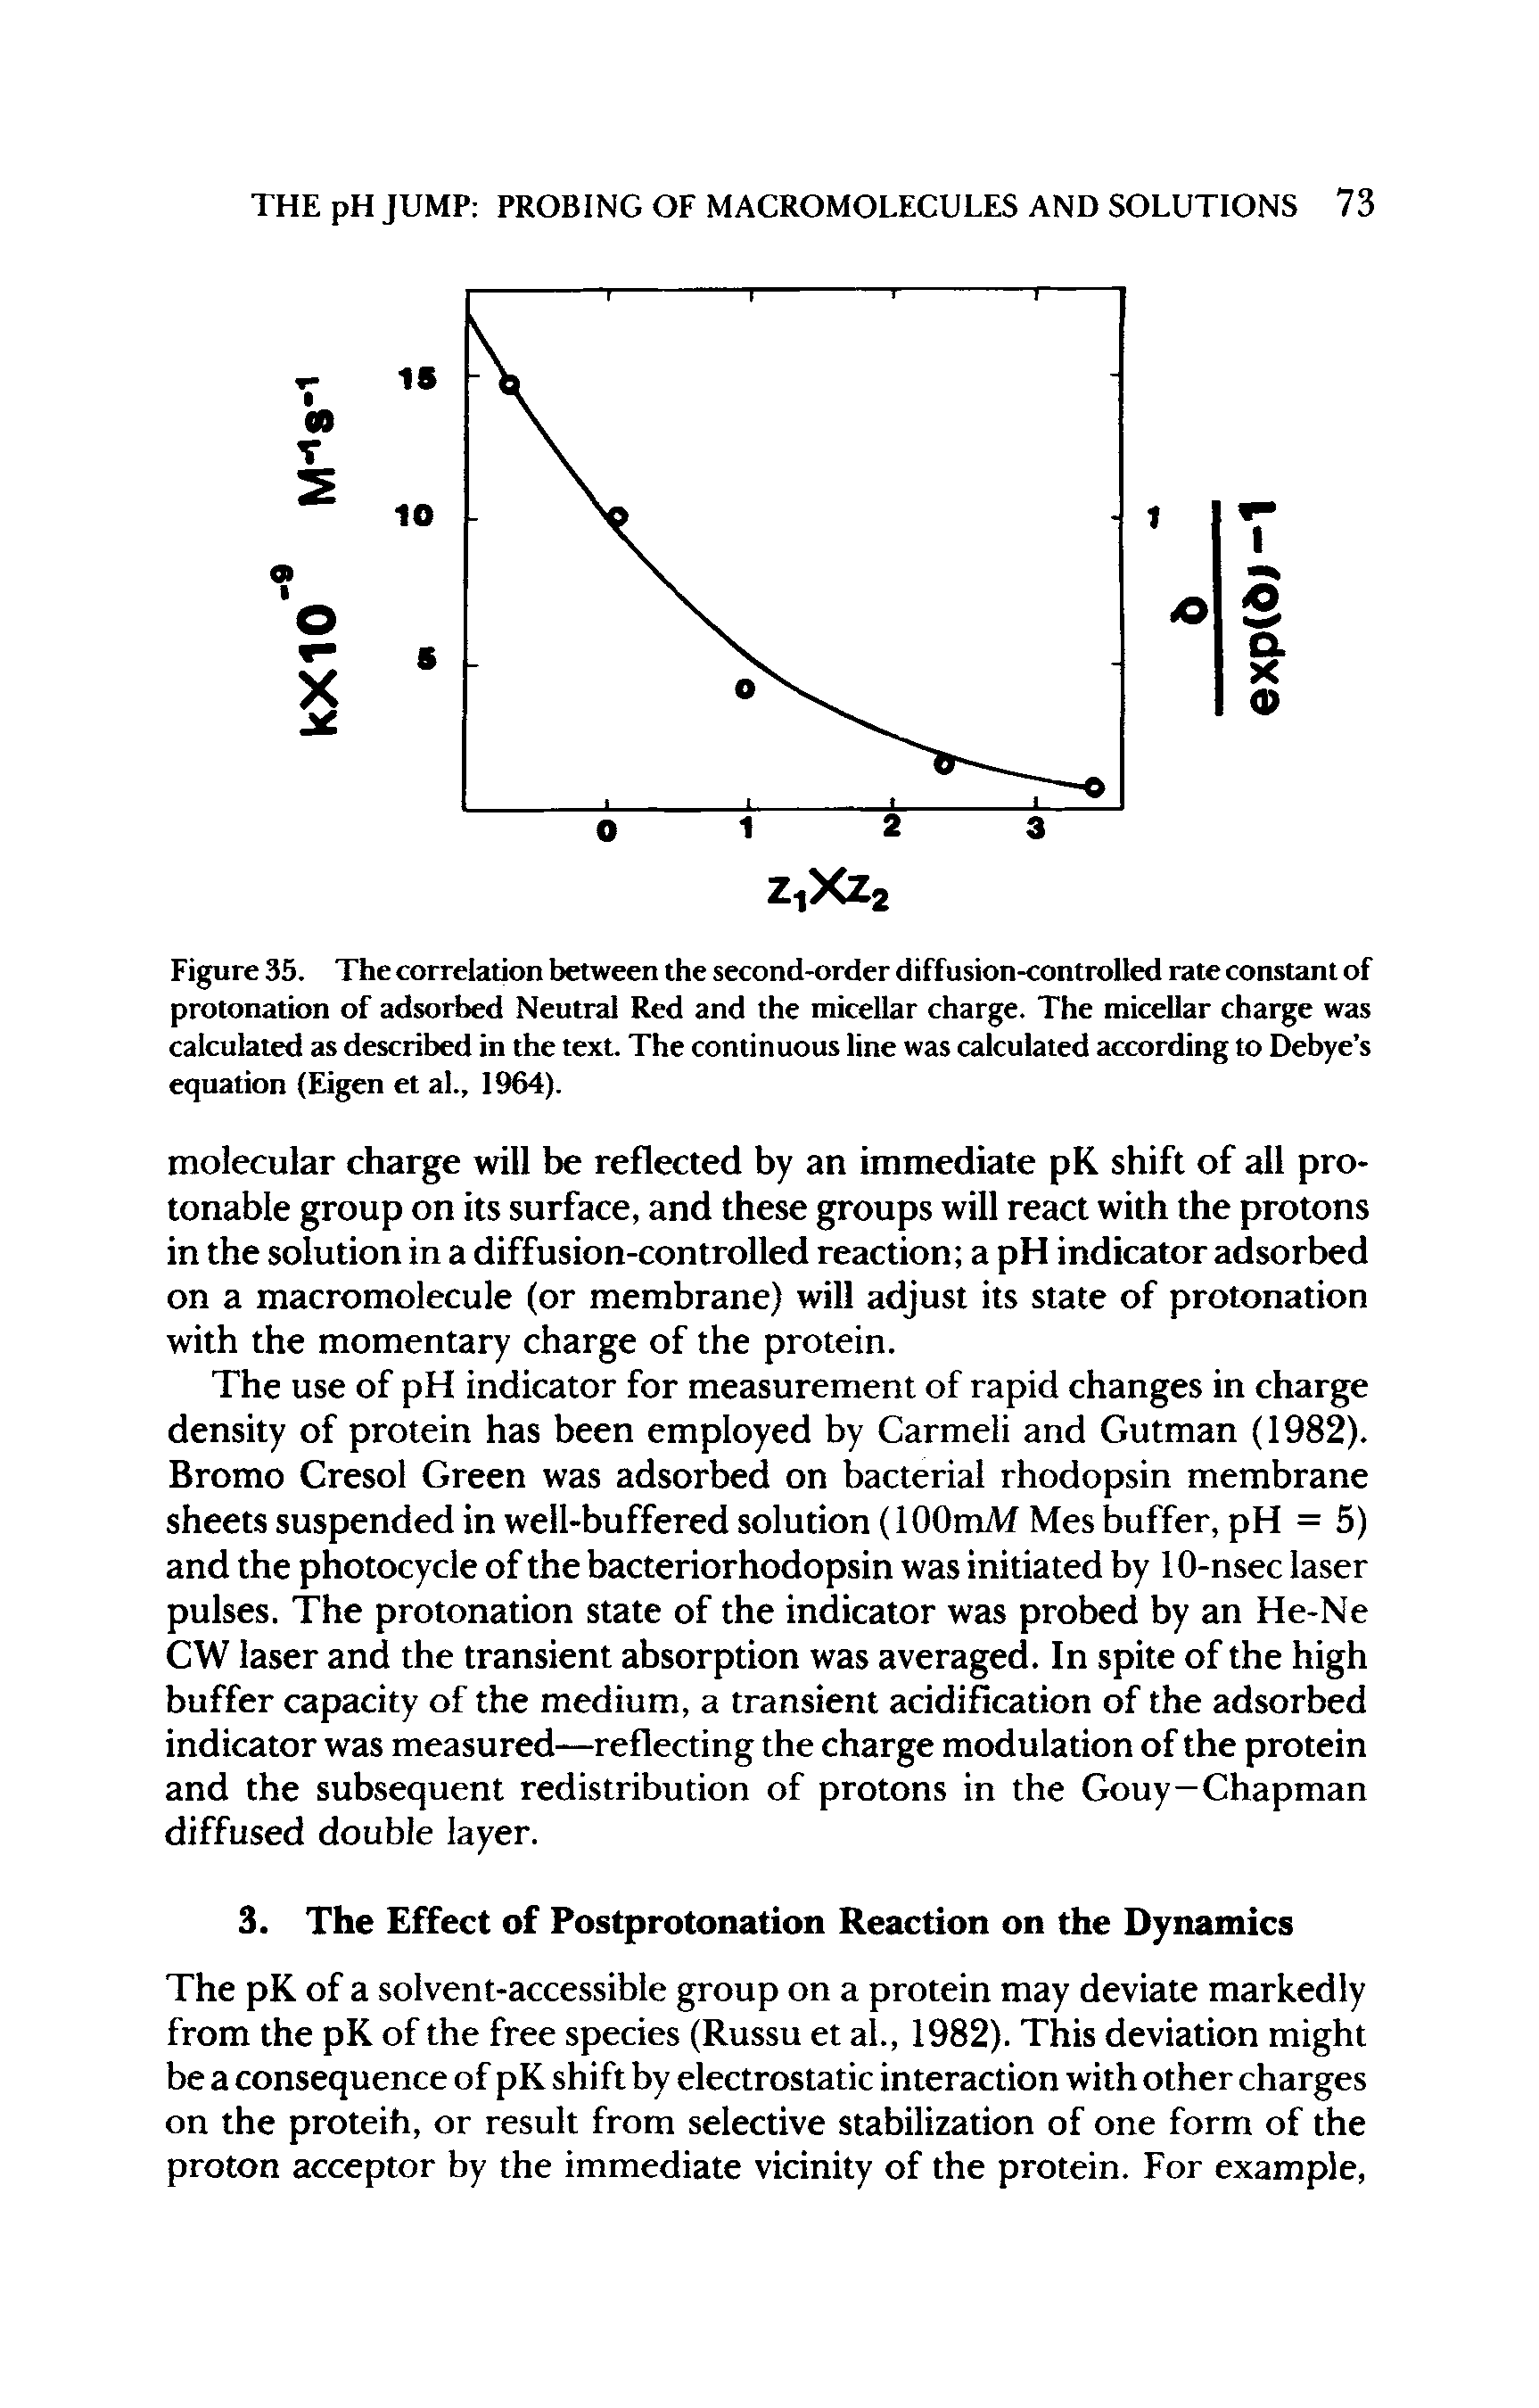 Figure 35. The correlation between the second-order diffusion-controlled rate constant of protonation of adsorbed Neutral Red and the micellar charge. The micellar charge was calculated as described in the text. The continuous line was calculated according to Debye s equation (Eigen et al., 1964).